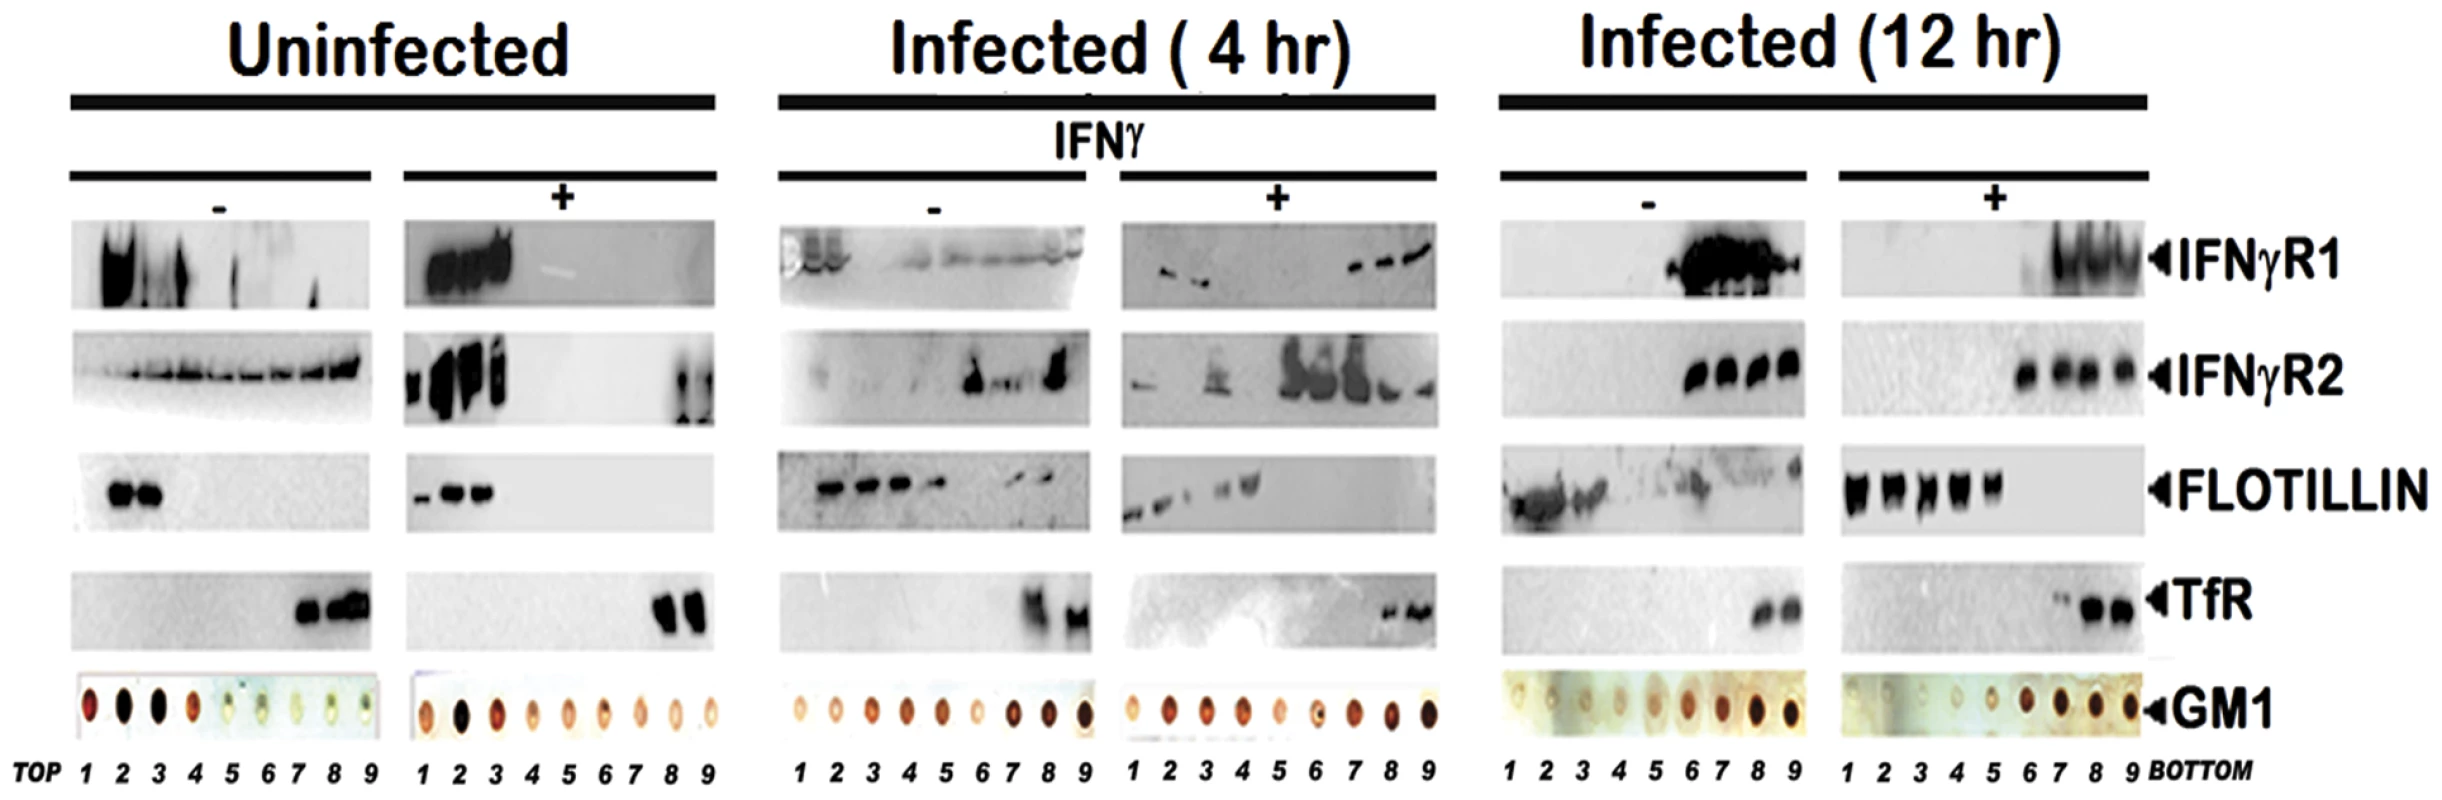 Disruption of lipid raft microdomains suppresses IFNγR subunit assembly in LD infected MØs.